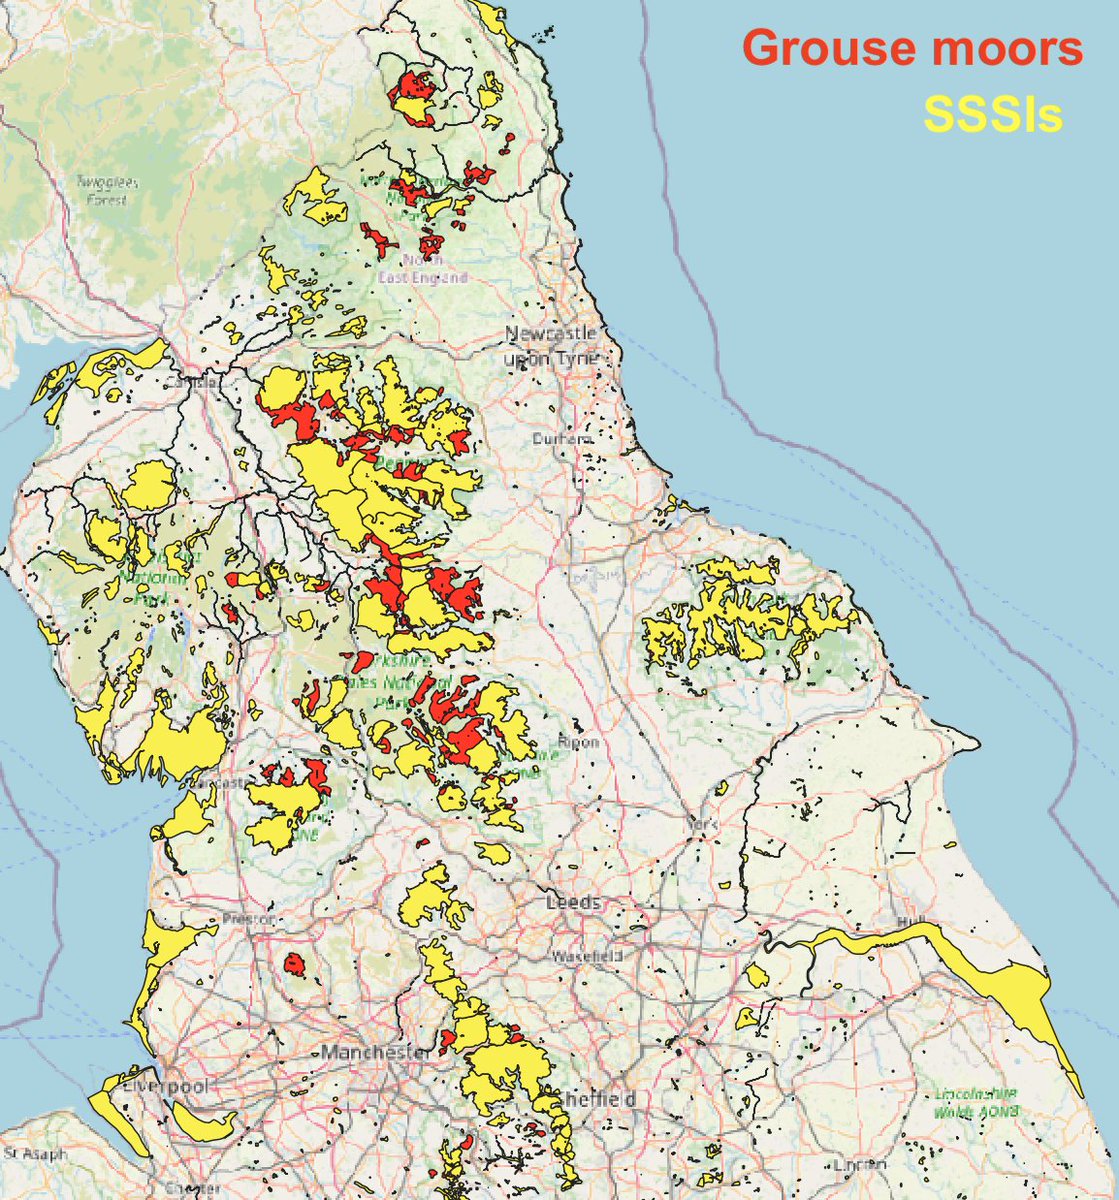 Here’s where grouse moors are covered by SSSI designations (Sites of Special Scientific Interest). Many are; the red areas are grouse moors outside of SSSIs. This is the first criterion to be caught by the burning ban. (see  https://www.gov.uk/government/news/englands-national-rainforests-to-be-protected-by-new-rules)(2/10)